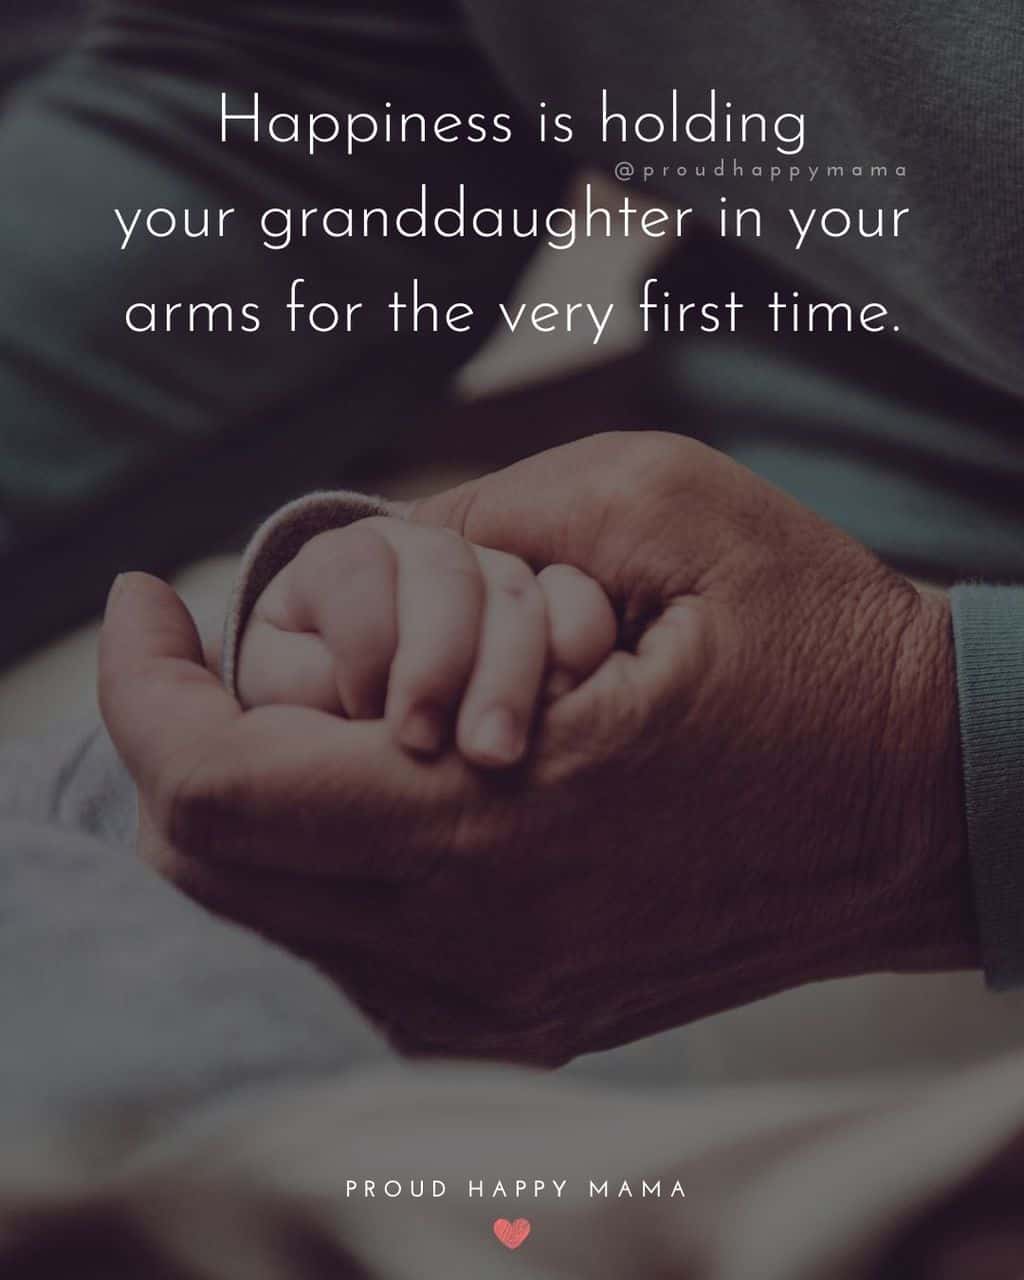 Granddaughter Quotes - Happiness is holding your granddaughter in your arms for the very first time.